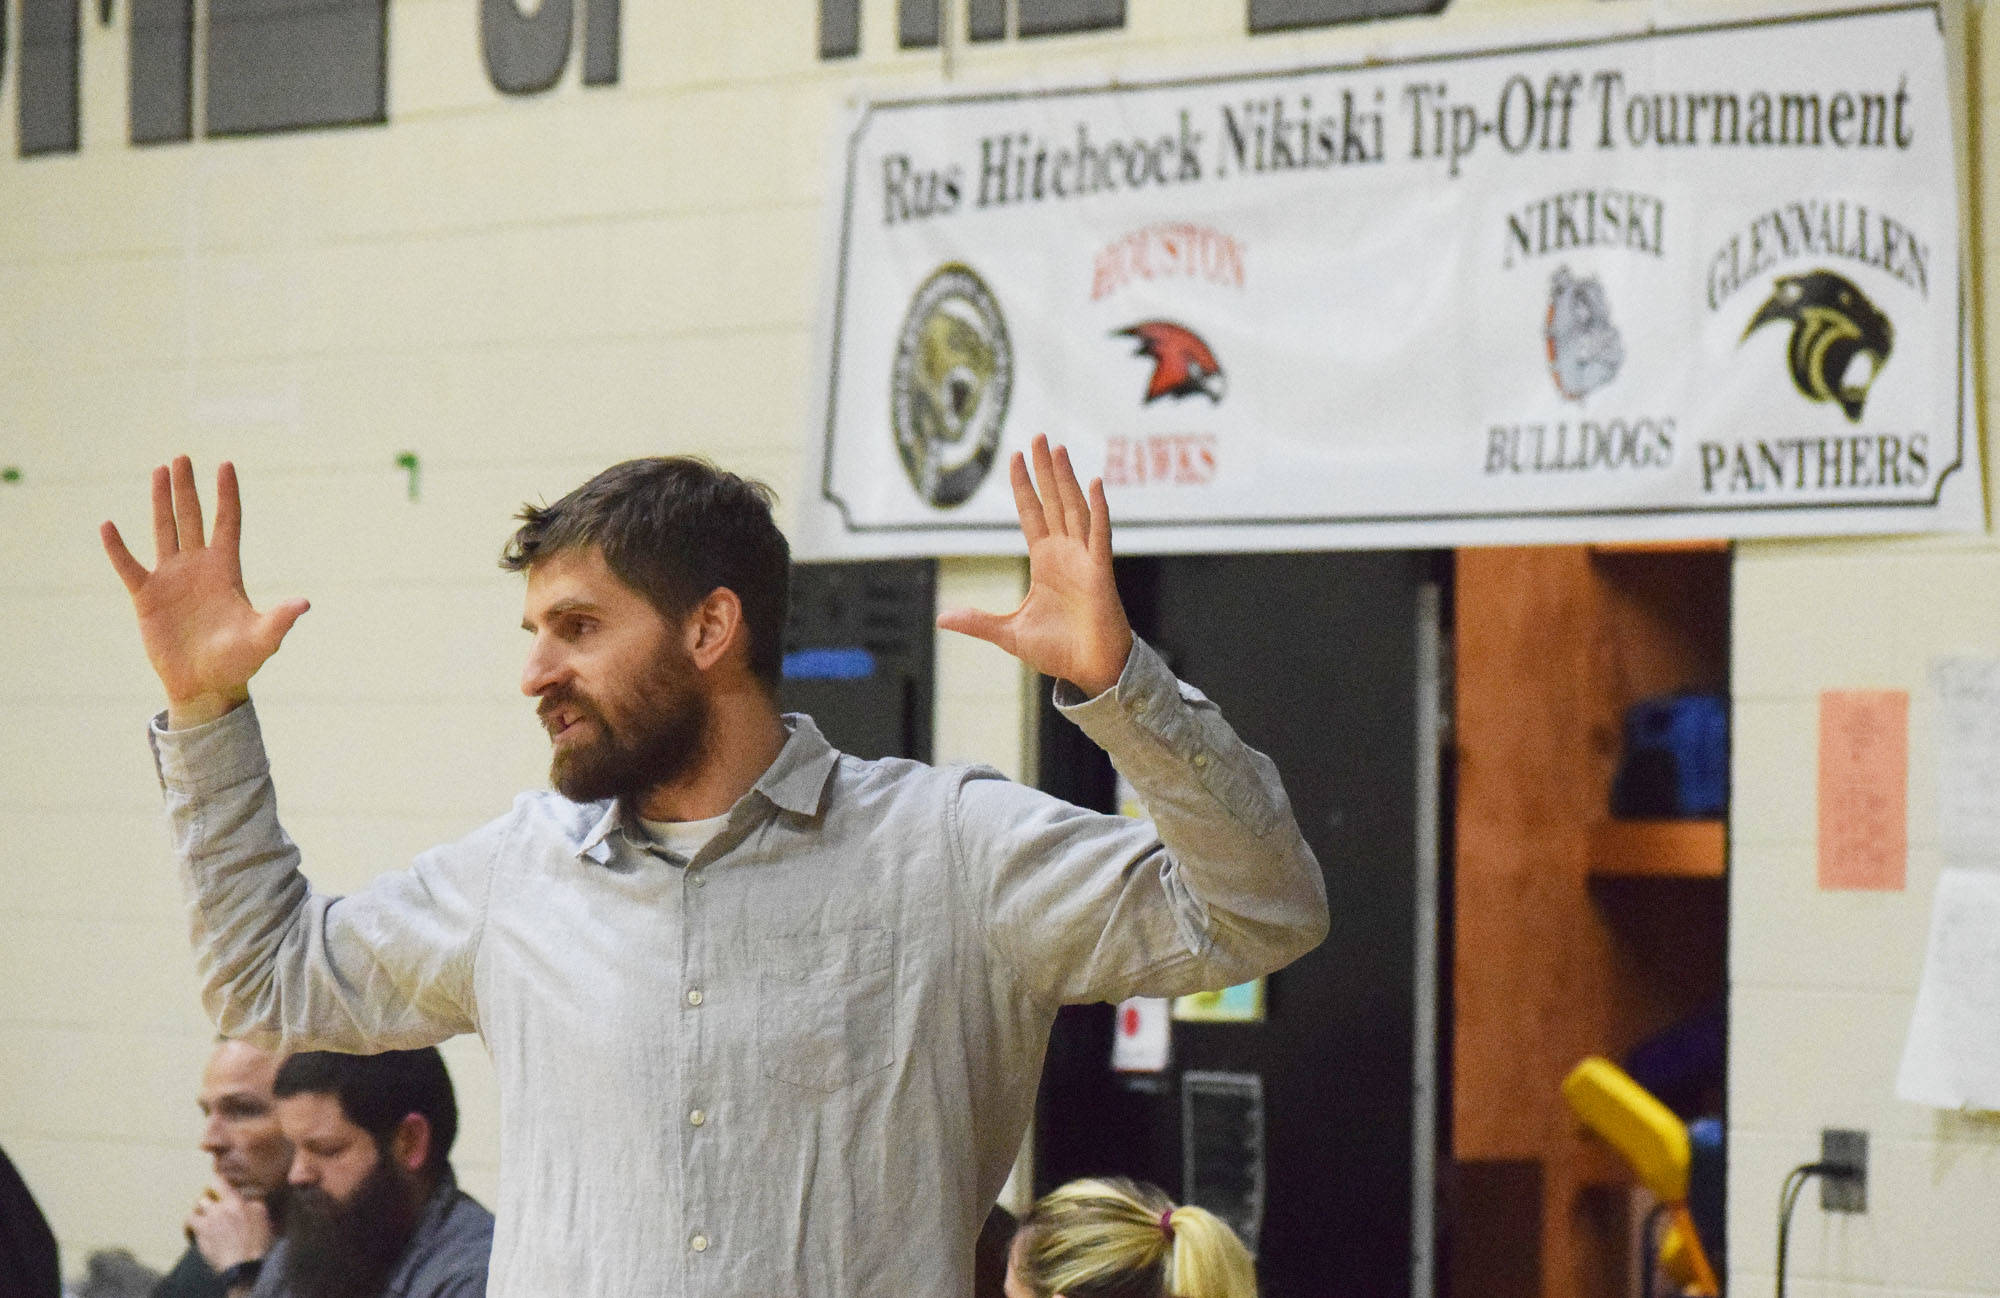 Nikiski girls head coach Rustin Hitchcock guides the Bulldogs from the bench Saturday at the Rus Hitchcock Nikiski Tip Off tournament. The names of the tournament honors Hitchcock’s late father, who passed away in Oct. 2017 to a heart attack. (Photo by Joey Klecka/Peninsula Clarion)